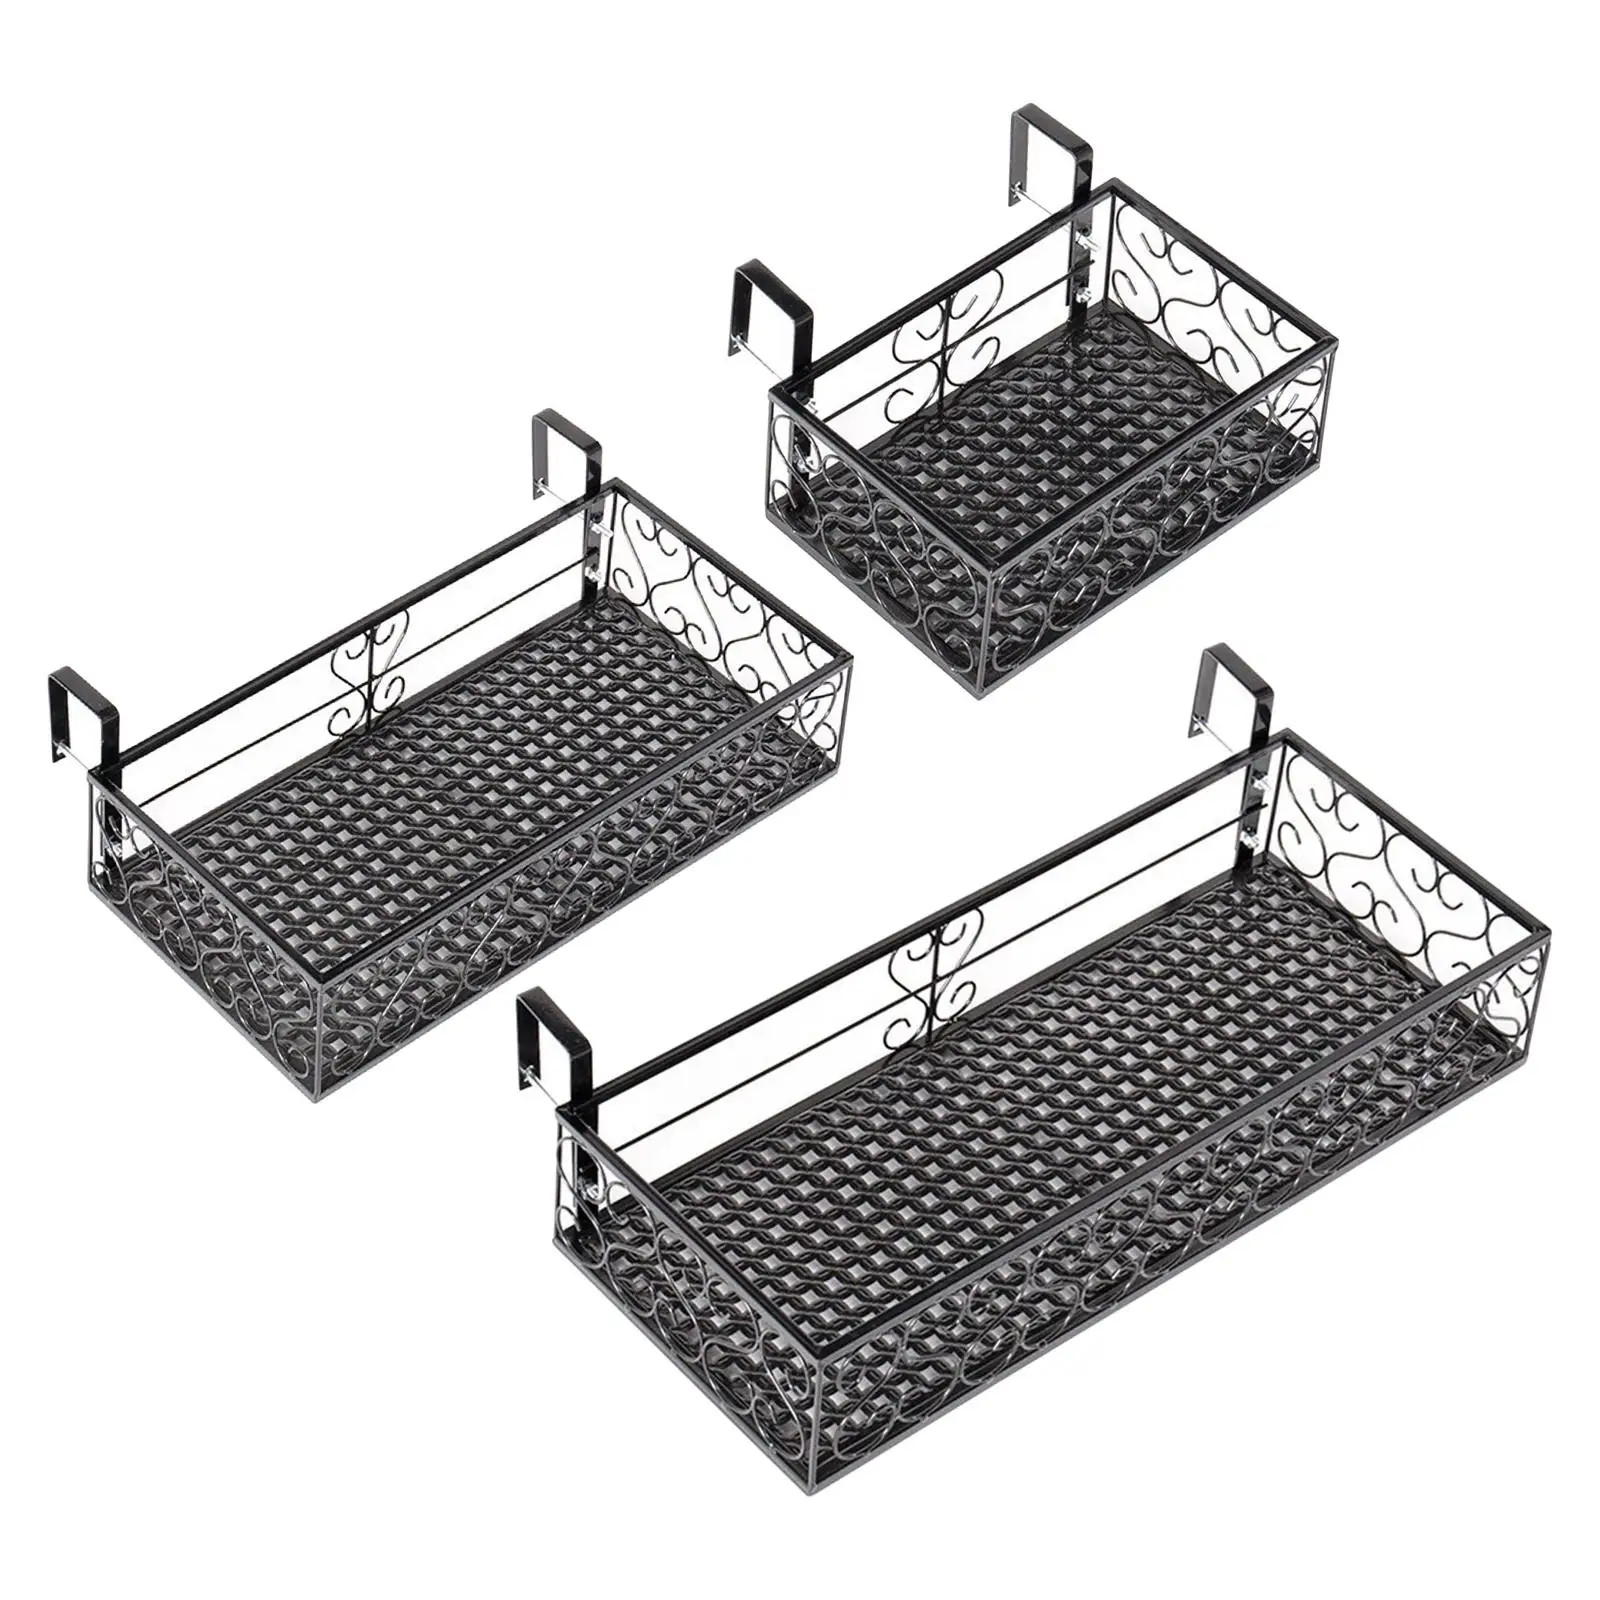 Wrought Iron Metal Planter Holder er Balcony Flowerpot ing Racks Stand Basket for Indoor and Outdoor Porches Patio Decor